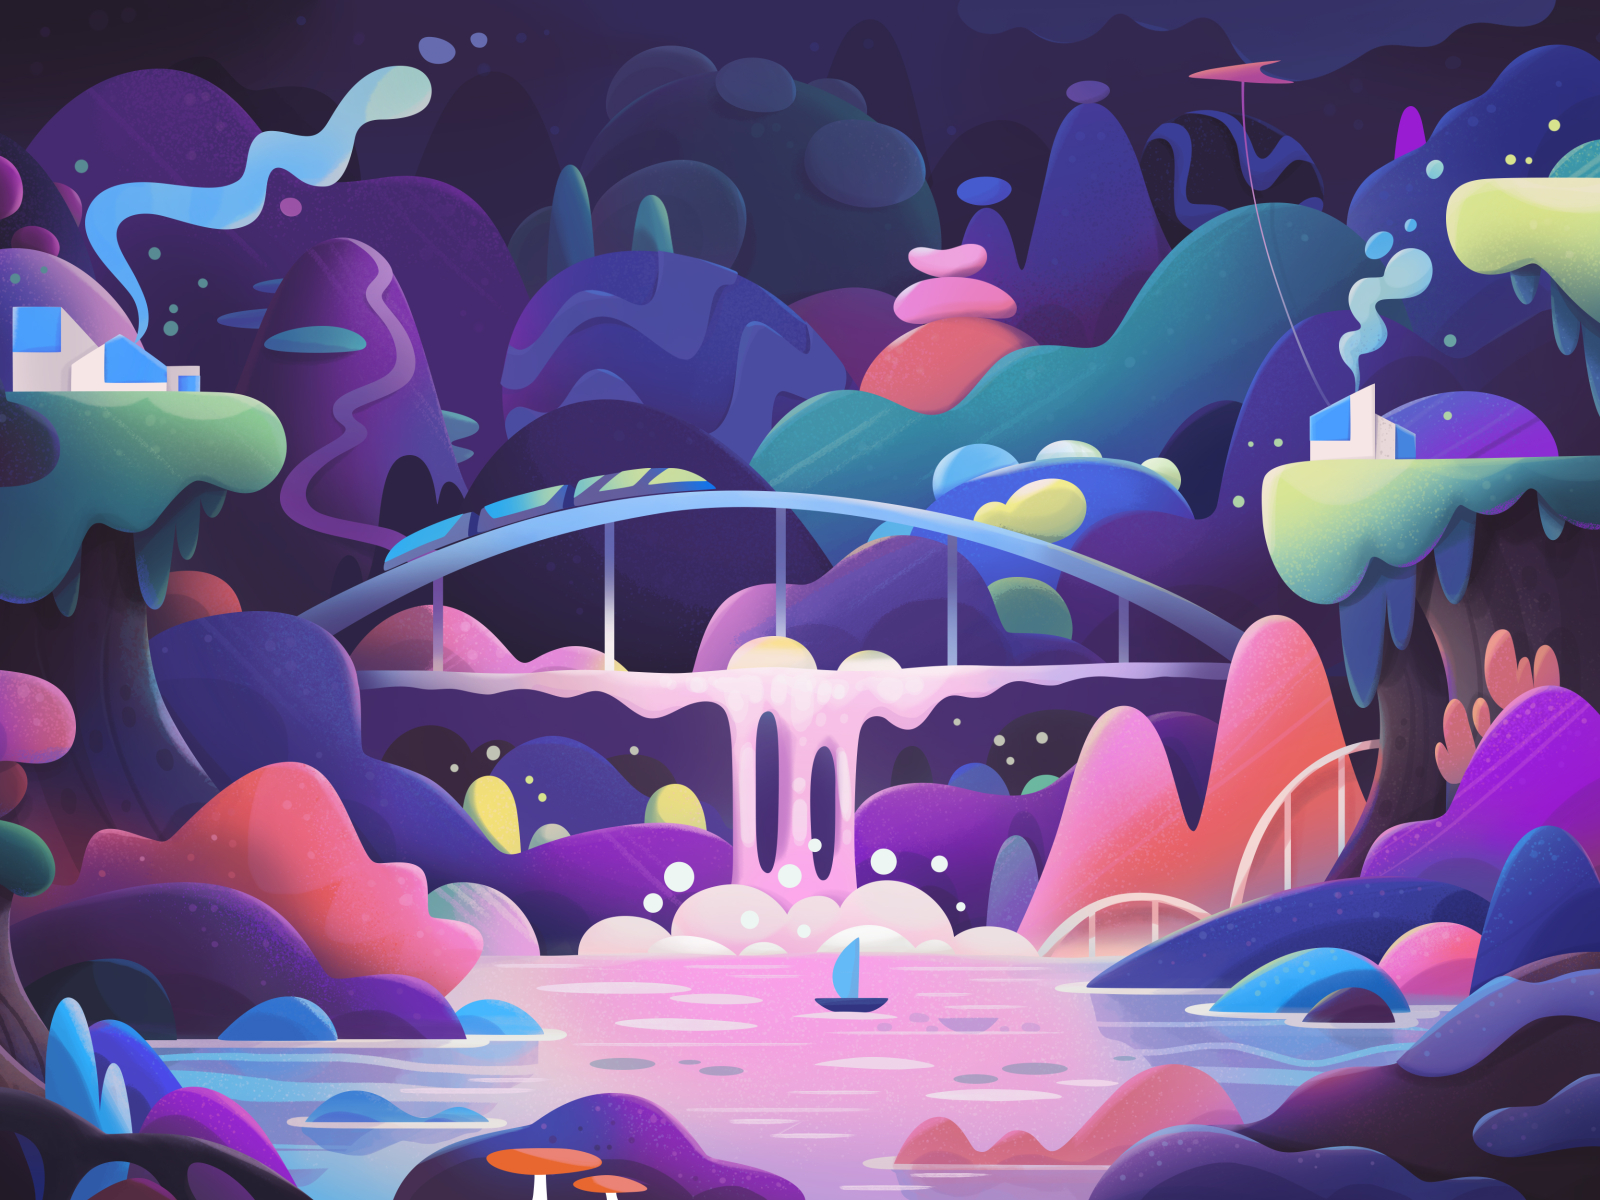 Chillhop Music  on Twitter  Wallpaper Chill Picture books illustration